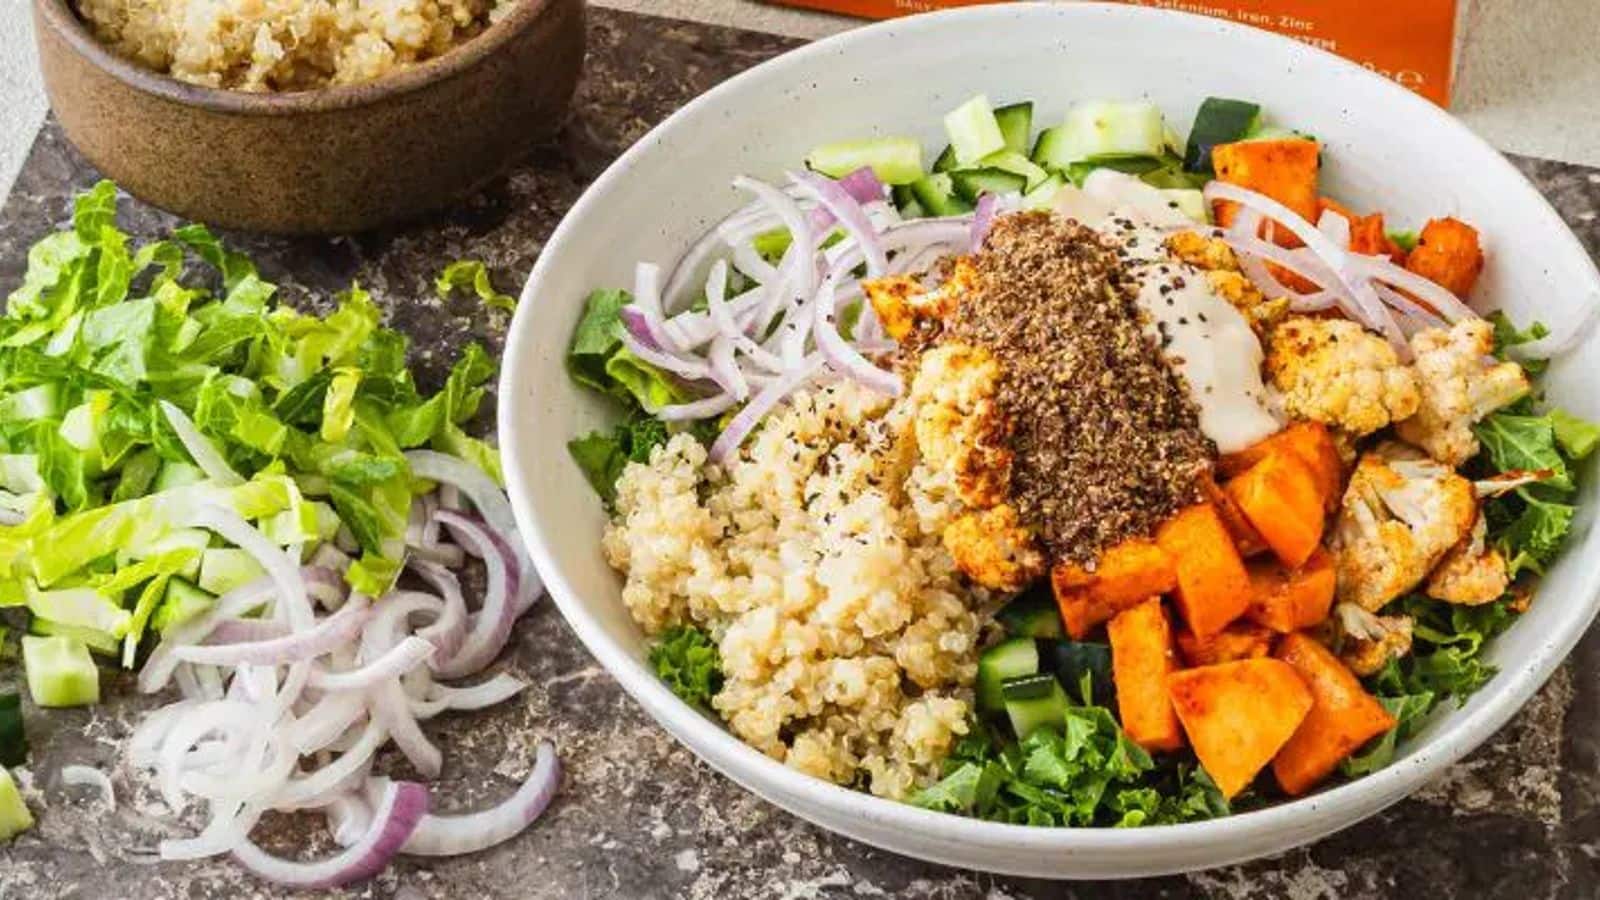 Boost your gut health with these wholesome salads